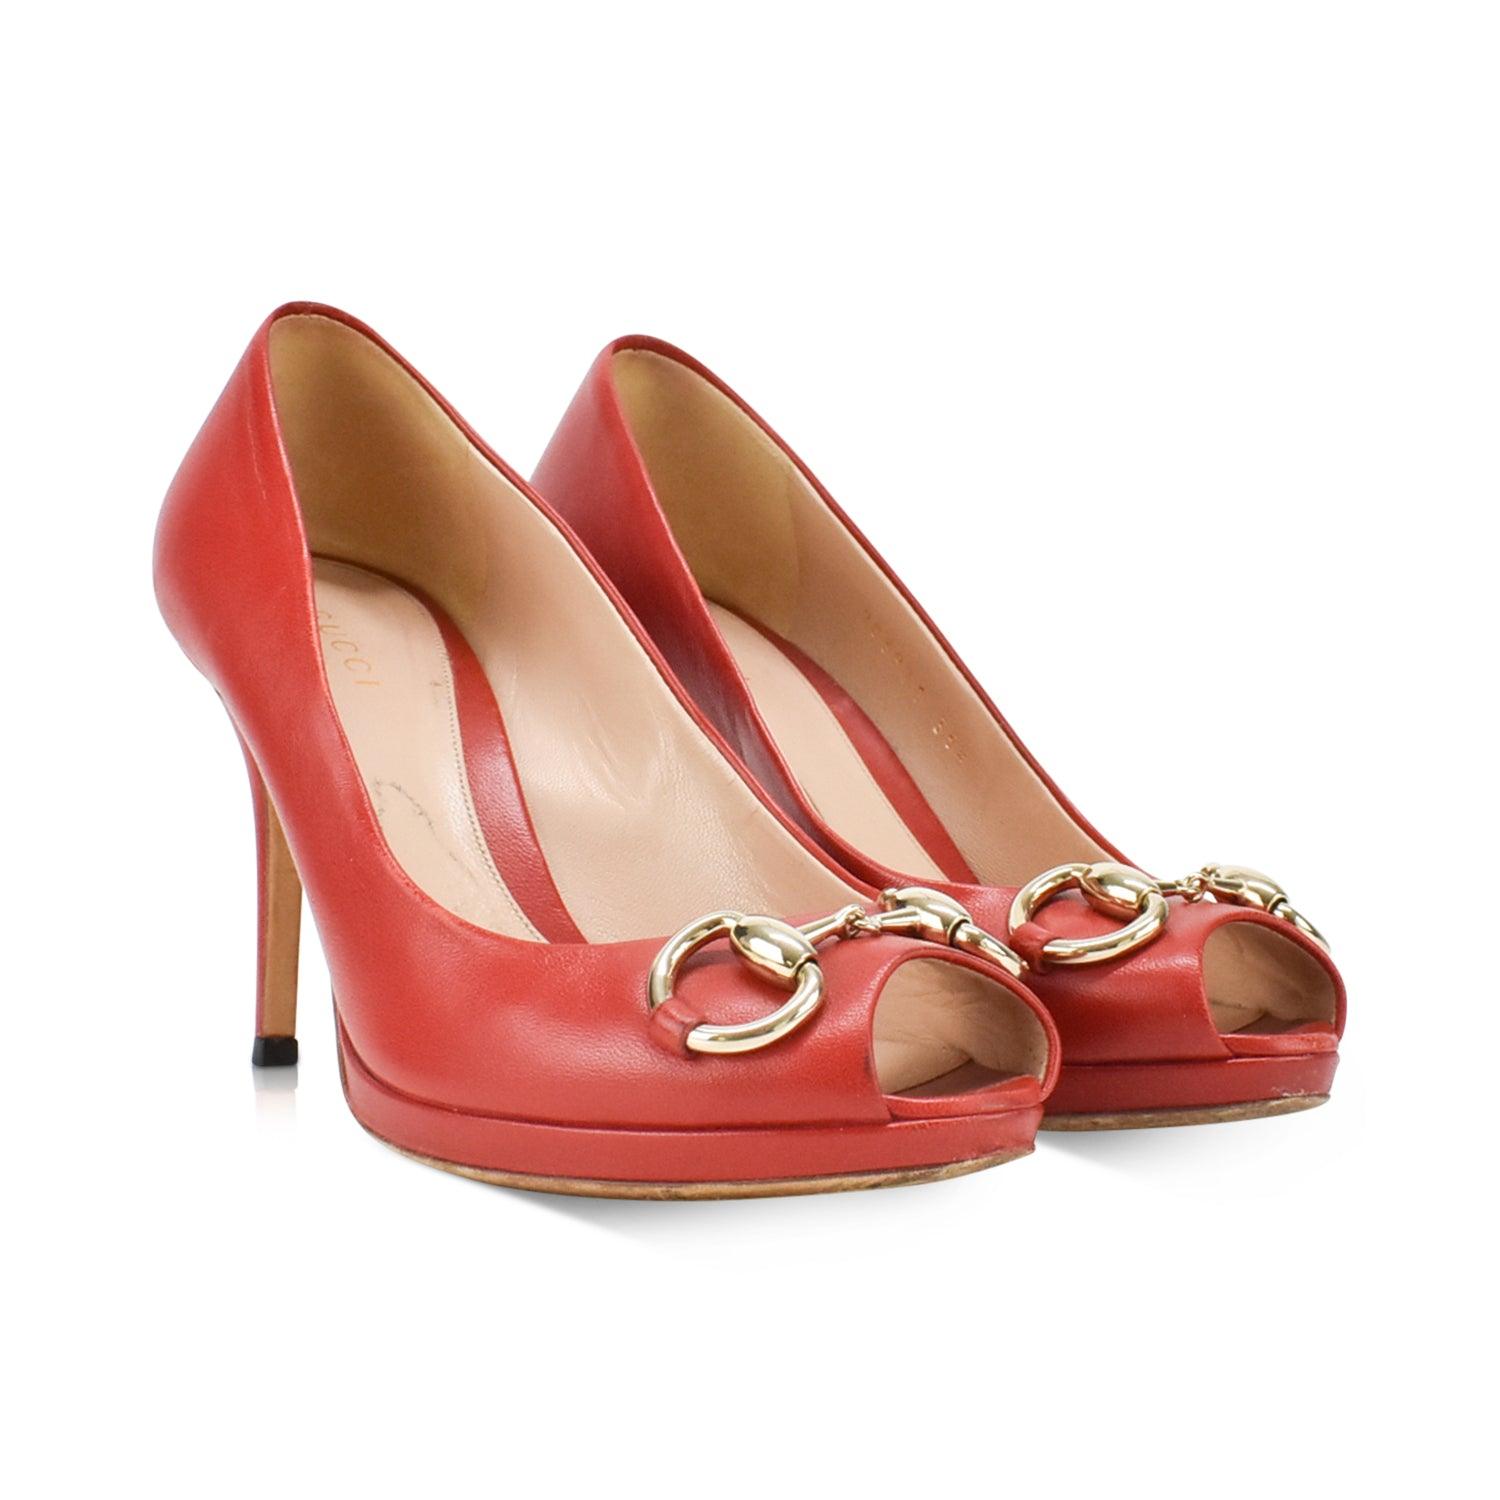 Gucci Pumps - Women's 35.5 - Fashionably Yours